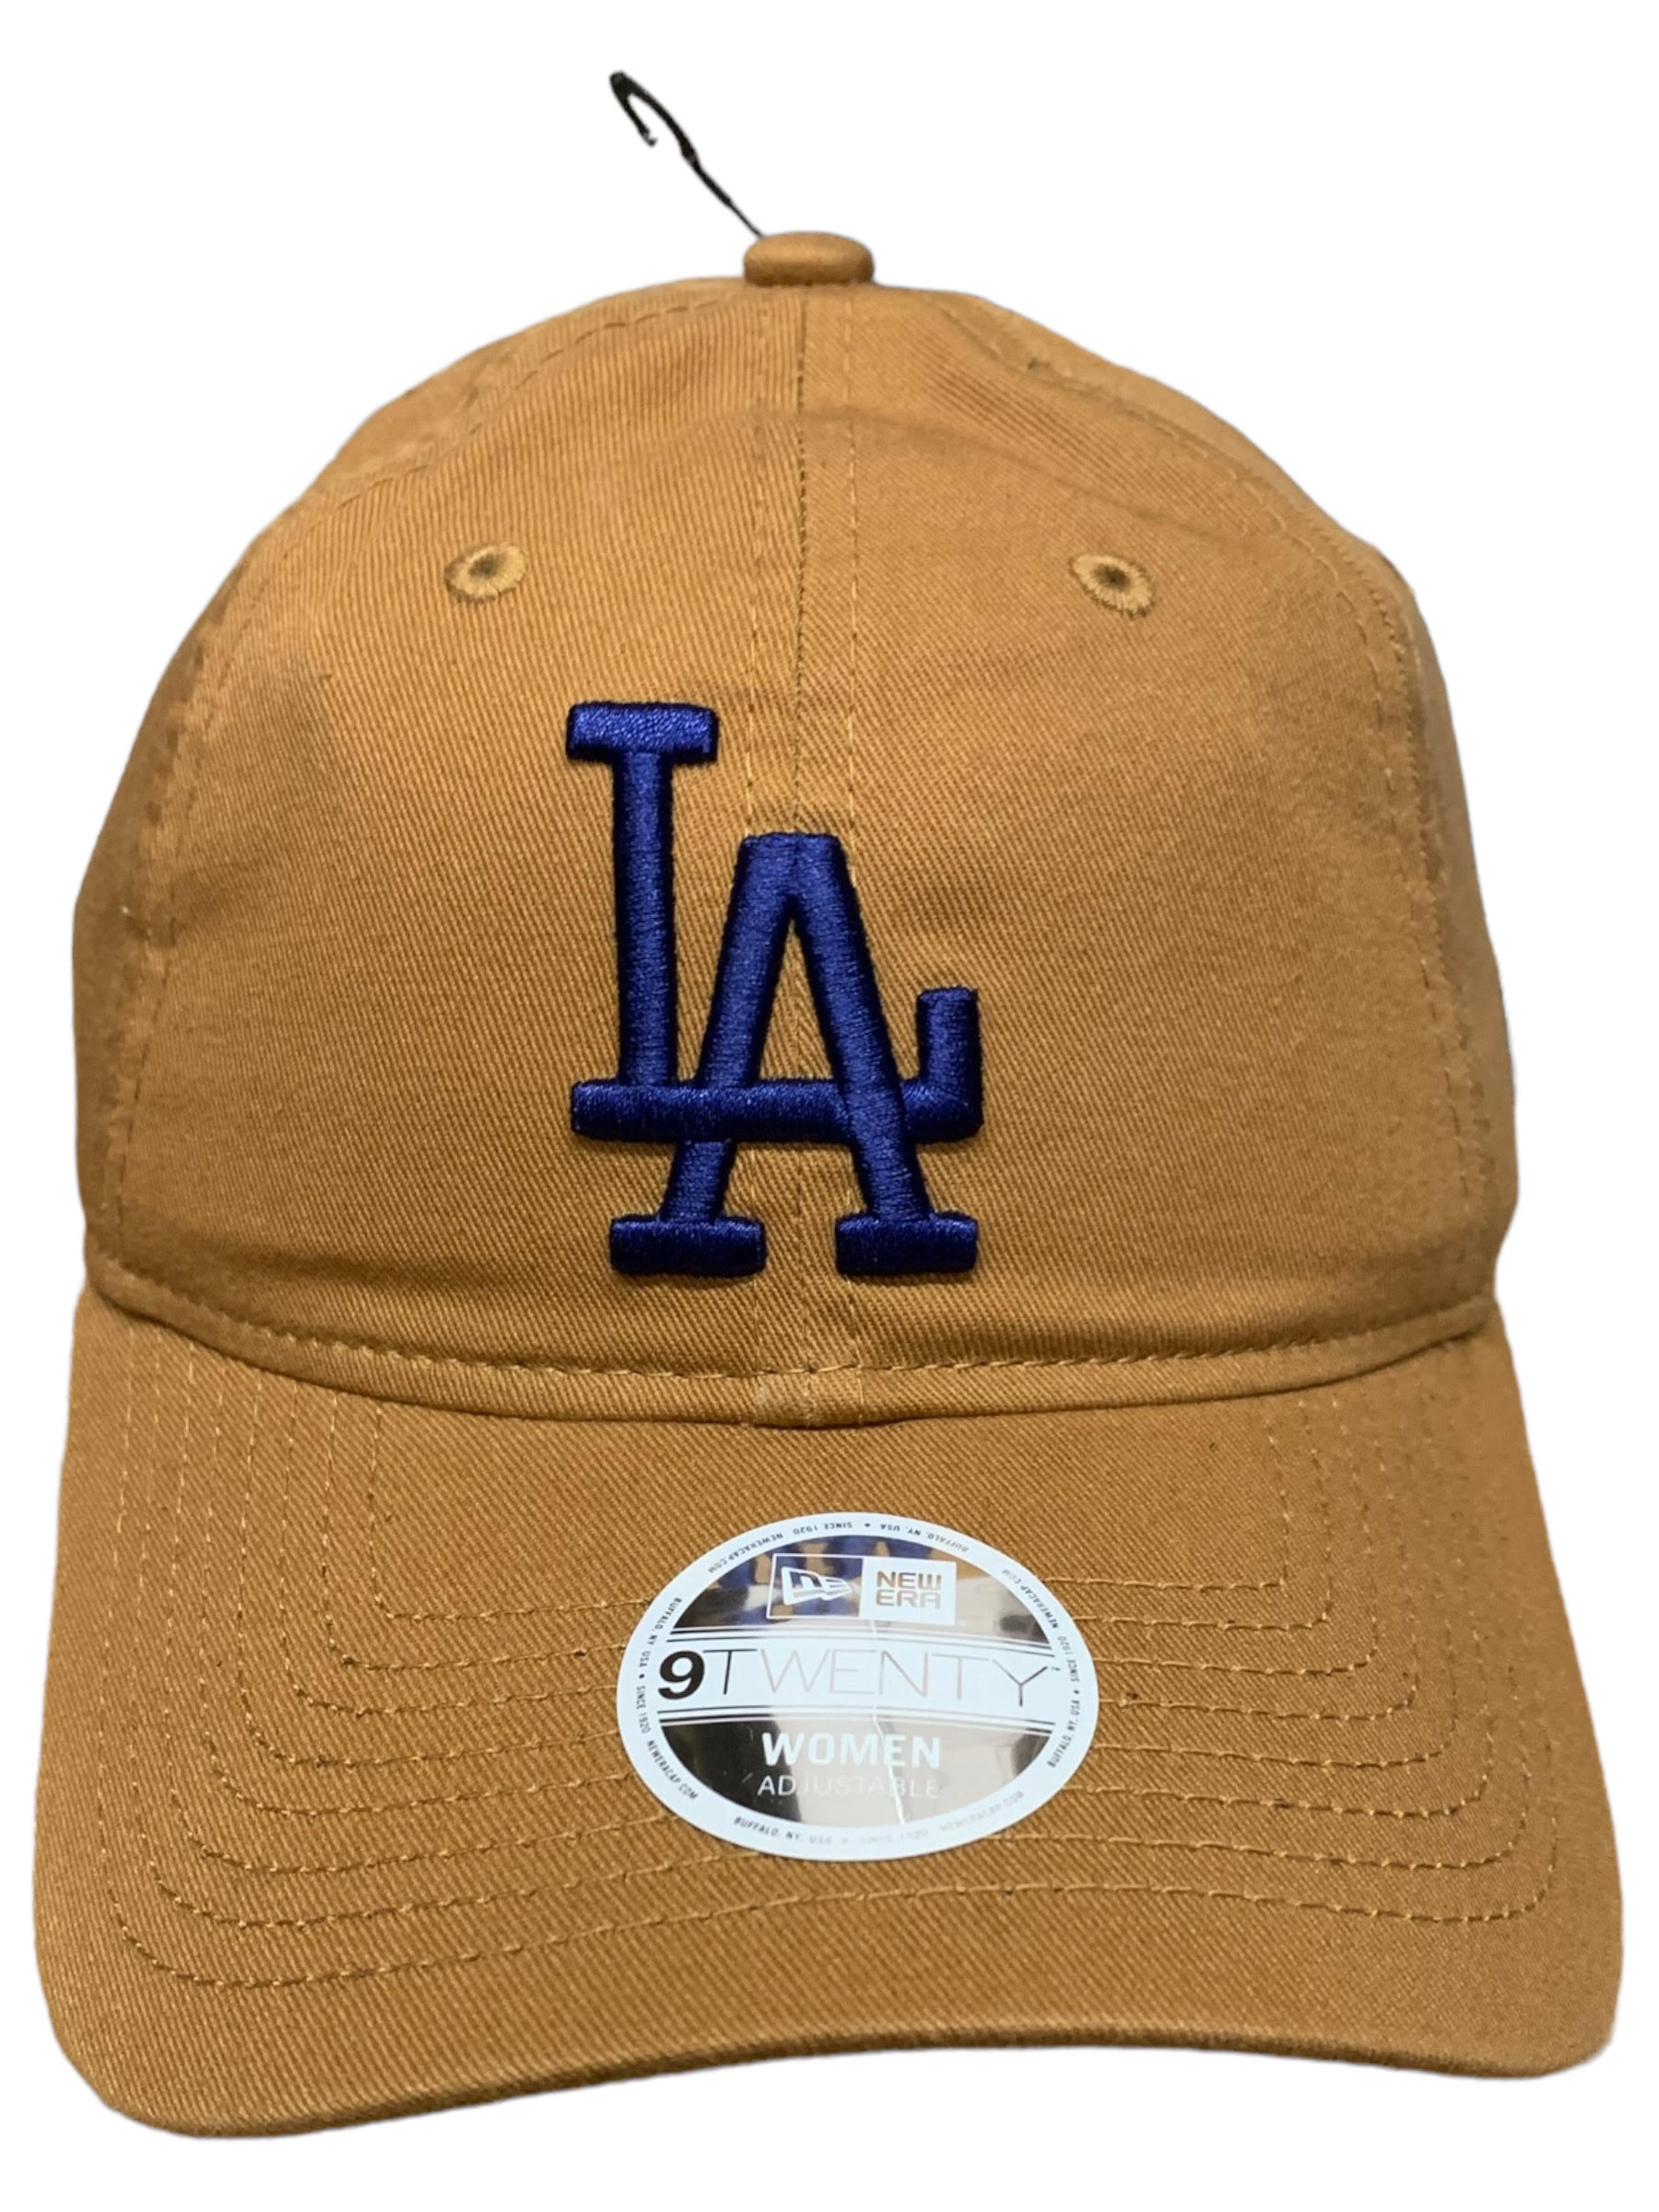 DODGERS GOLD COLLECTION – JR'S SPORTS